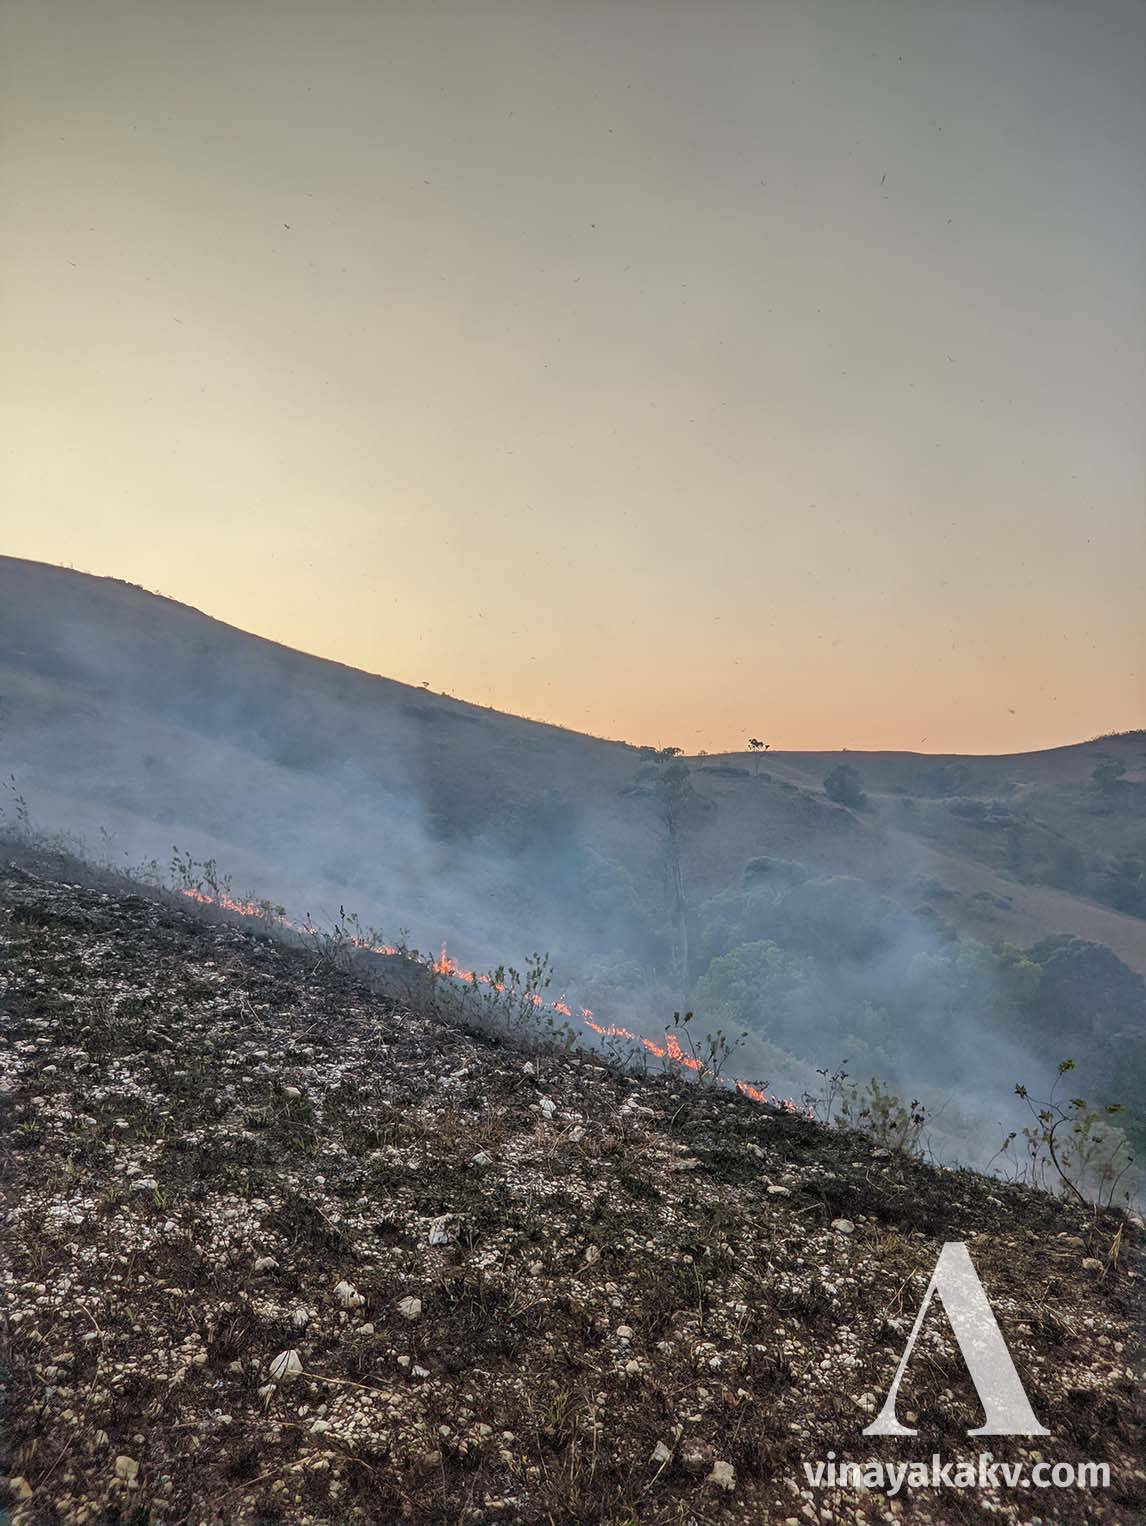 The fire front progressing through Shola grassland. Observe flying ashes. Shola forest in the background, which remains unharmed by the fire.